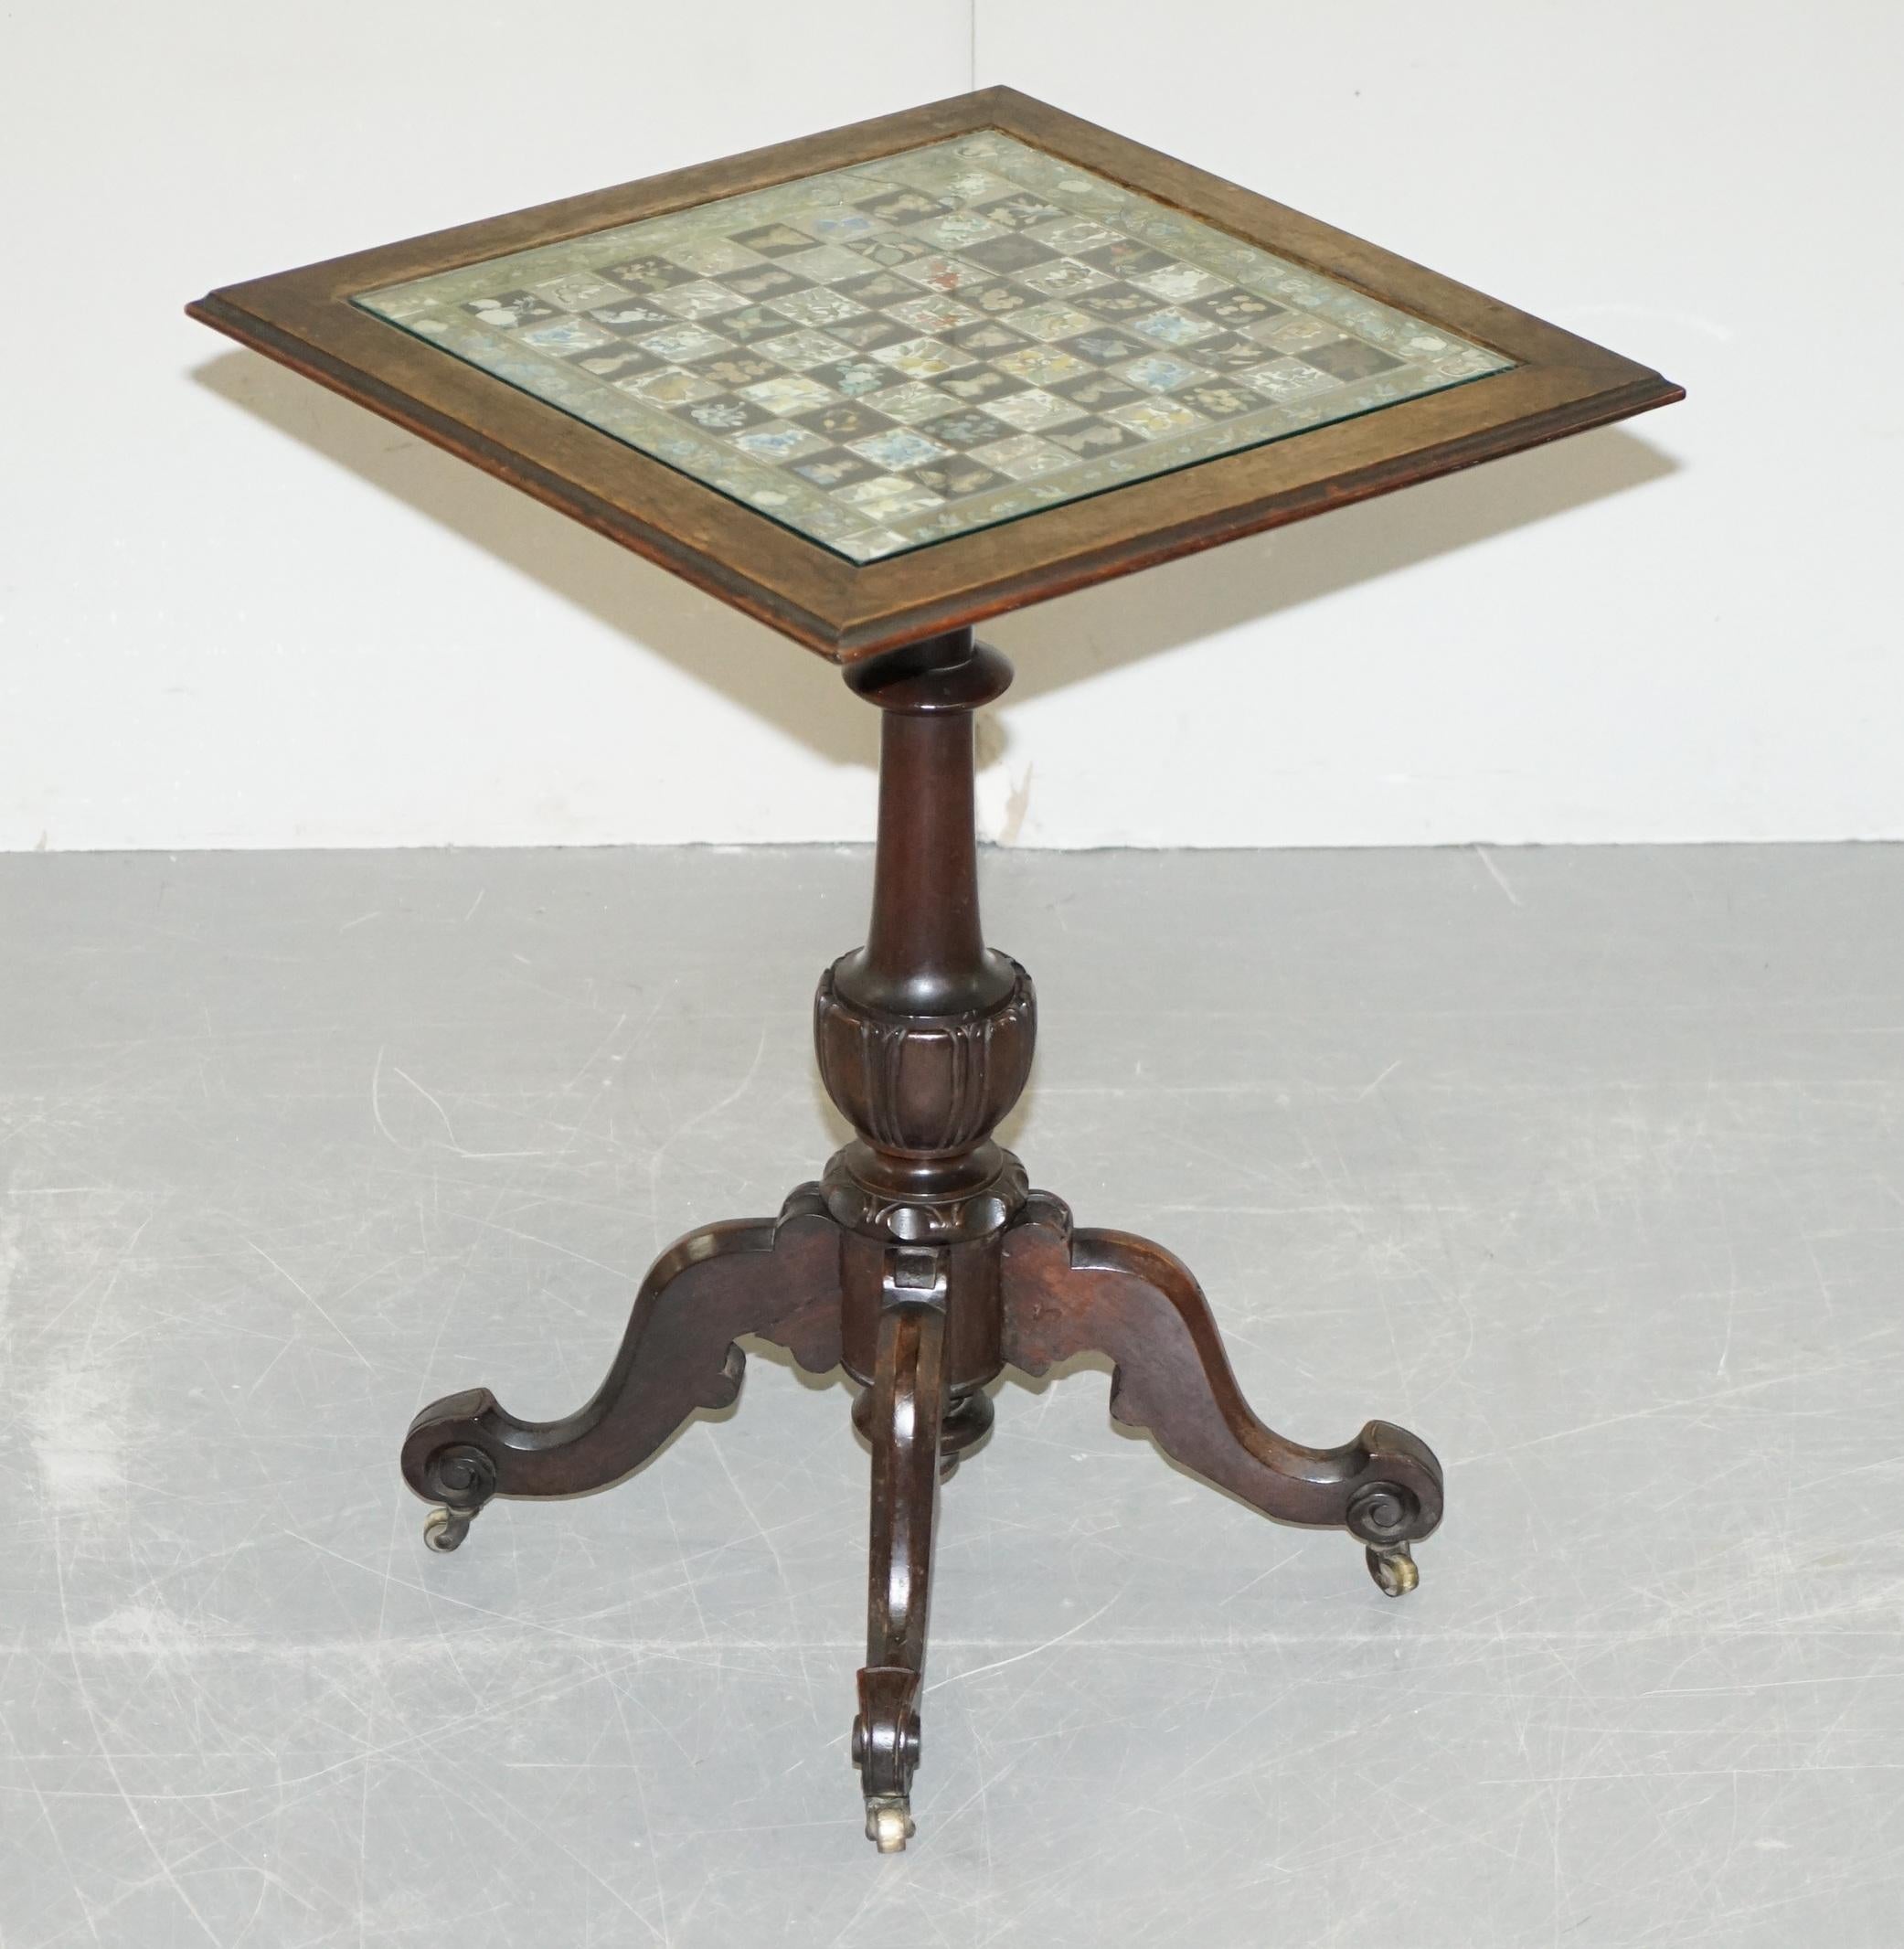 We are delighted to offer for sale this lovely original Victorian Decoupage Chess board table with period castors and glass top

A very good looking and decorative antique piece. Please note the glass Decoupage top is the original and it is broken